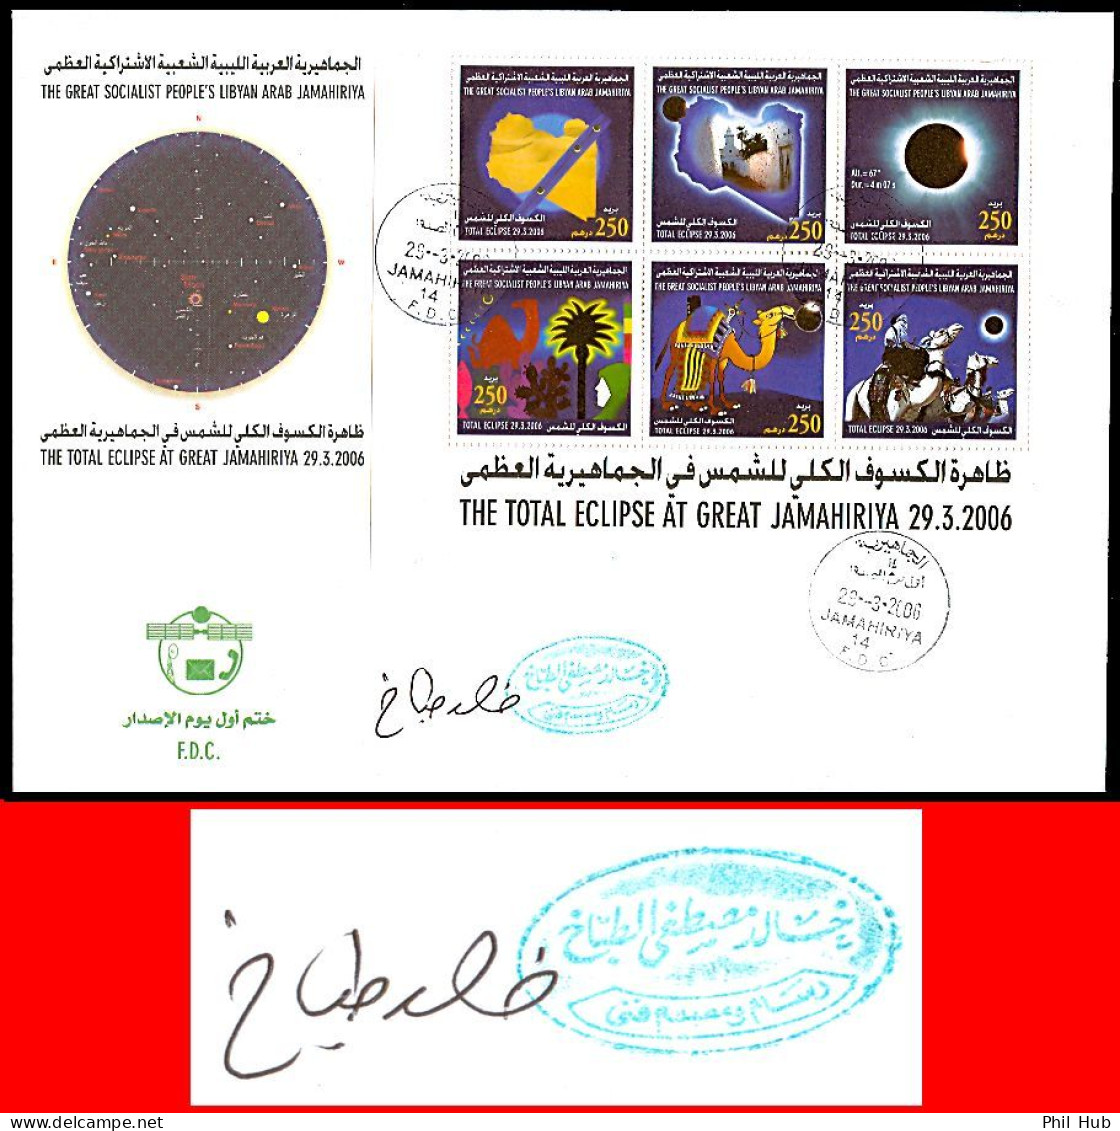 LIBYA 2006 Eclipse Astronomy (SPECIAL FDC WITH ARTIST'S STAMP+SIGNATURE) *** BANK TRANSFER ONLY *** - Astronomy